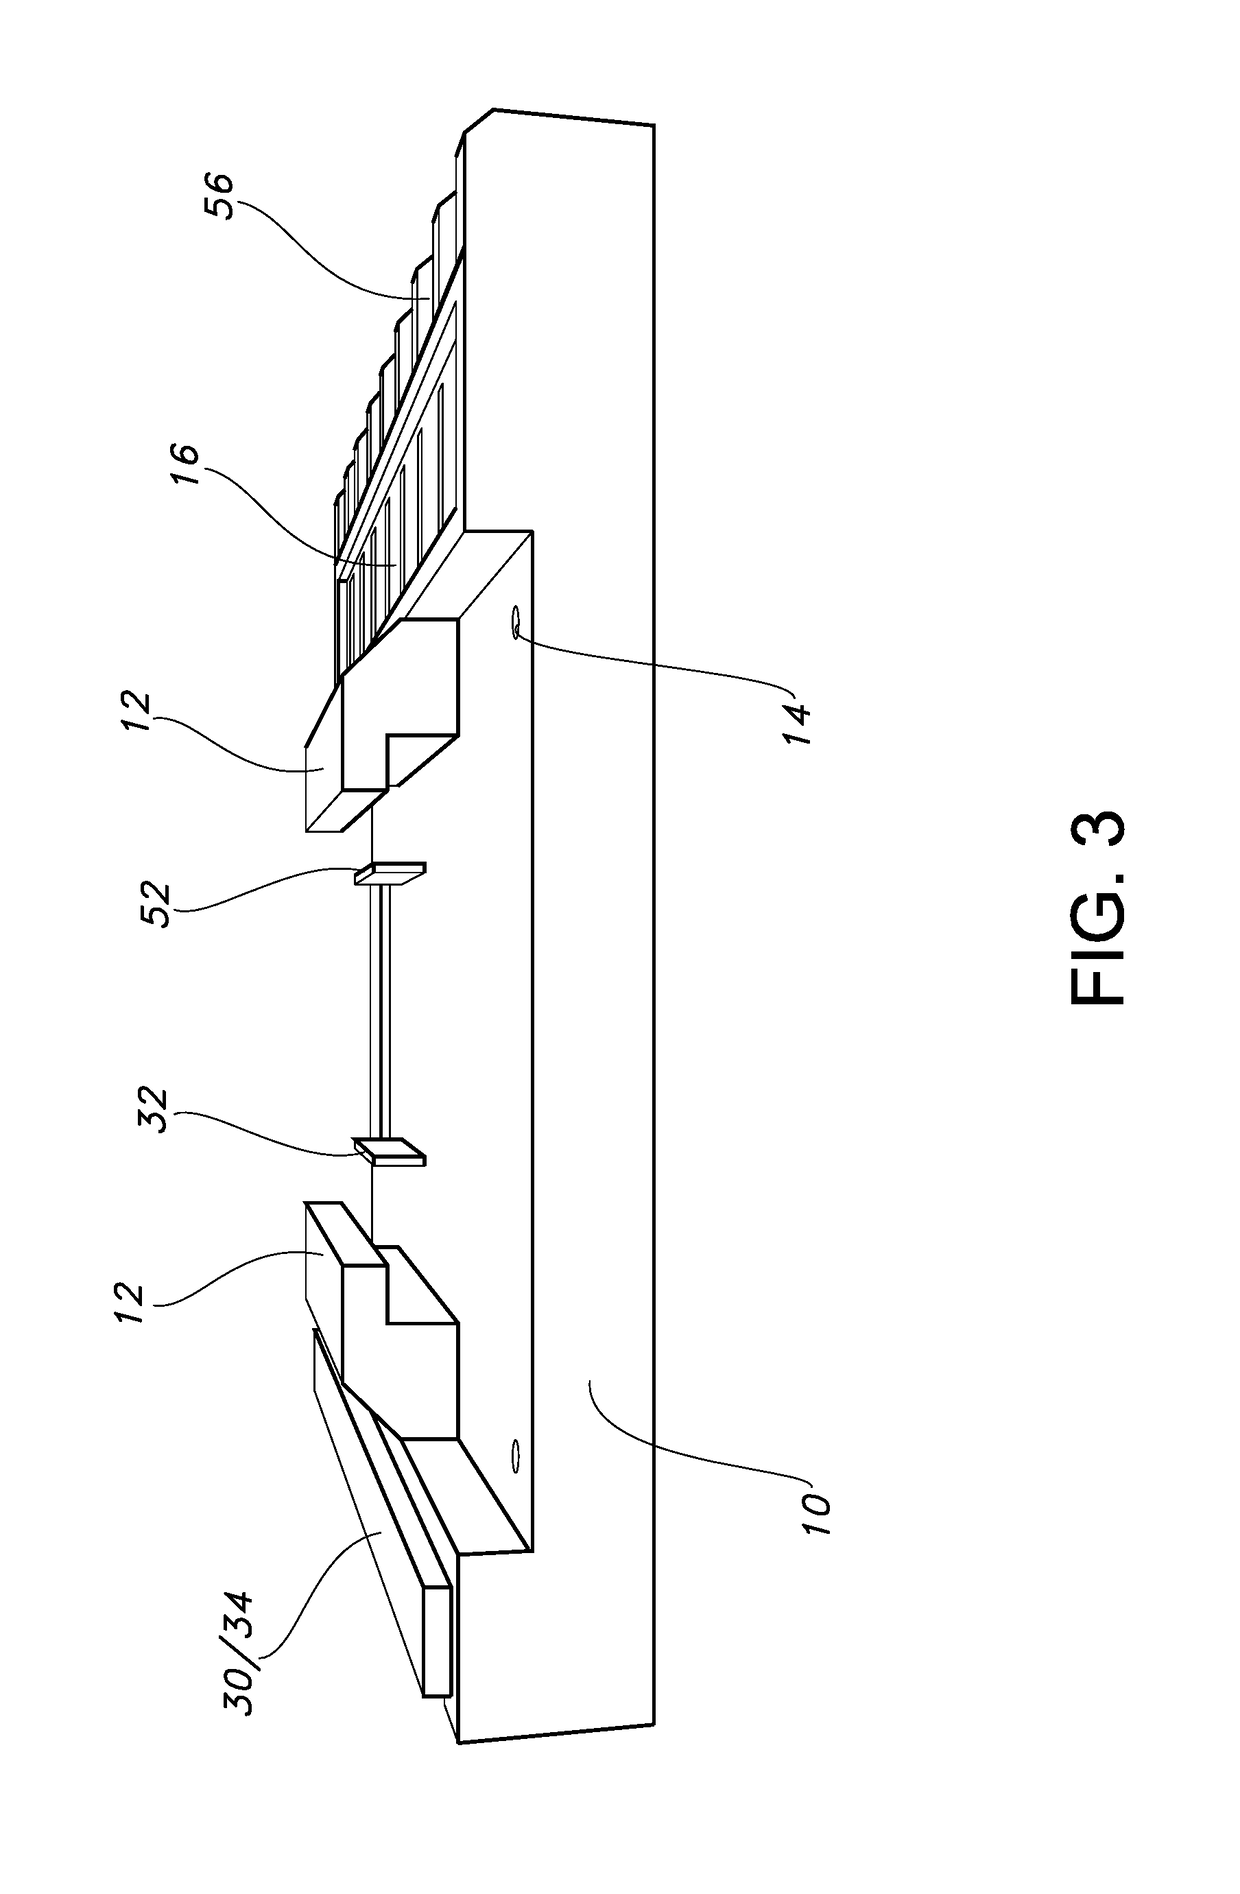 Power distribution device for use with portable battery